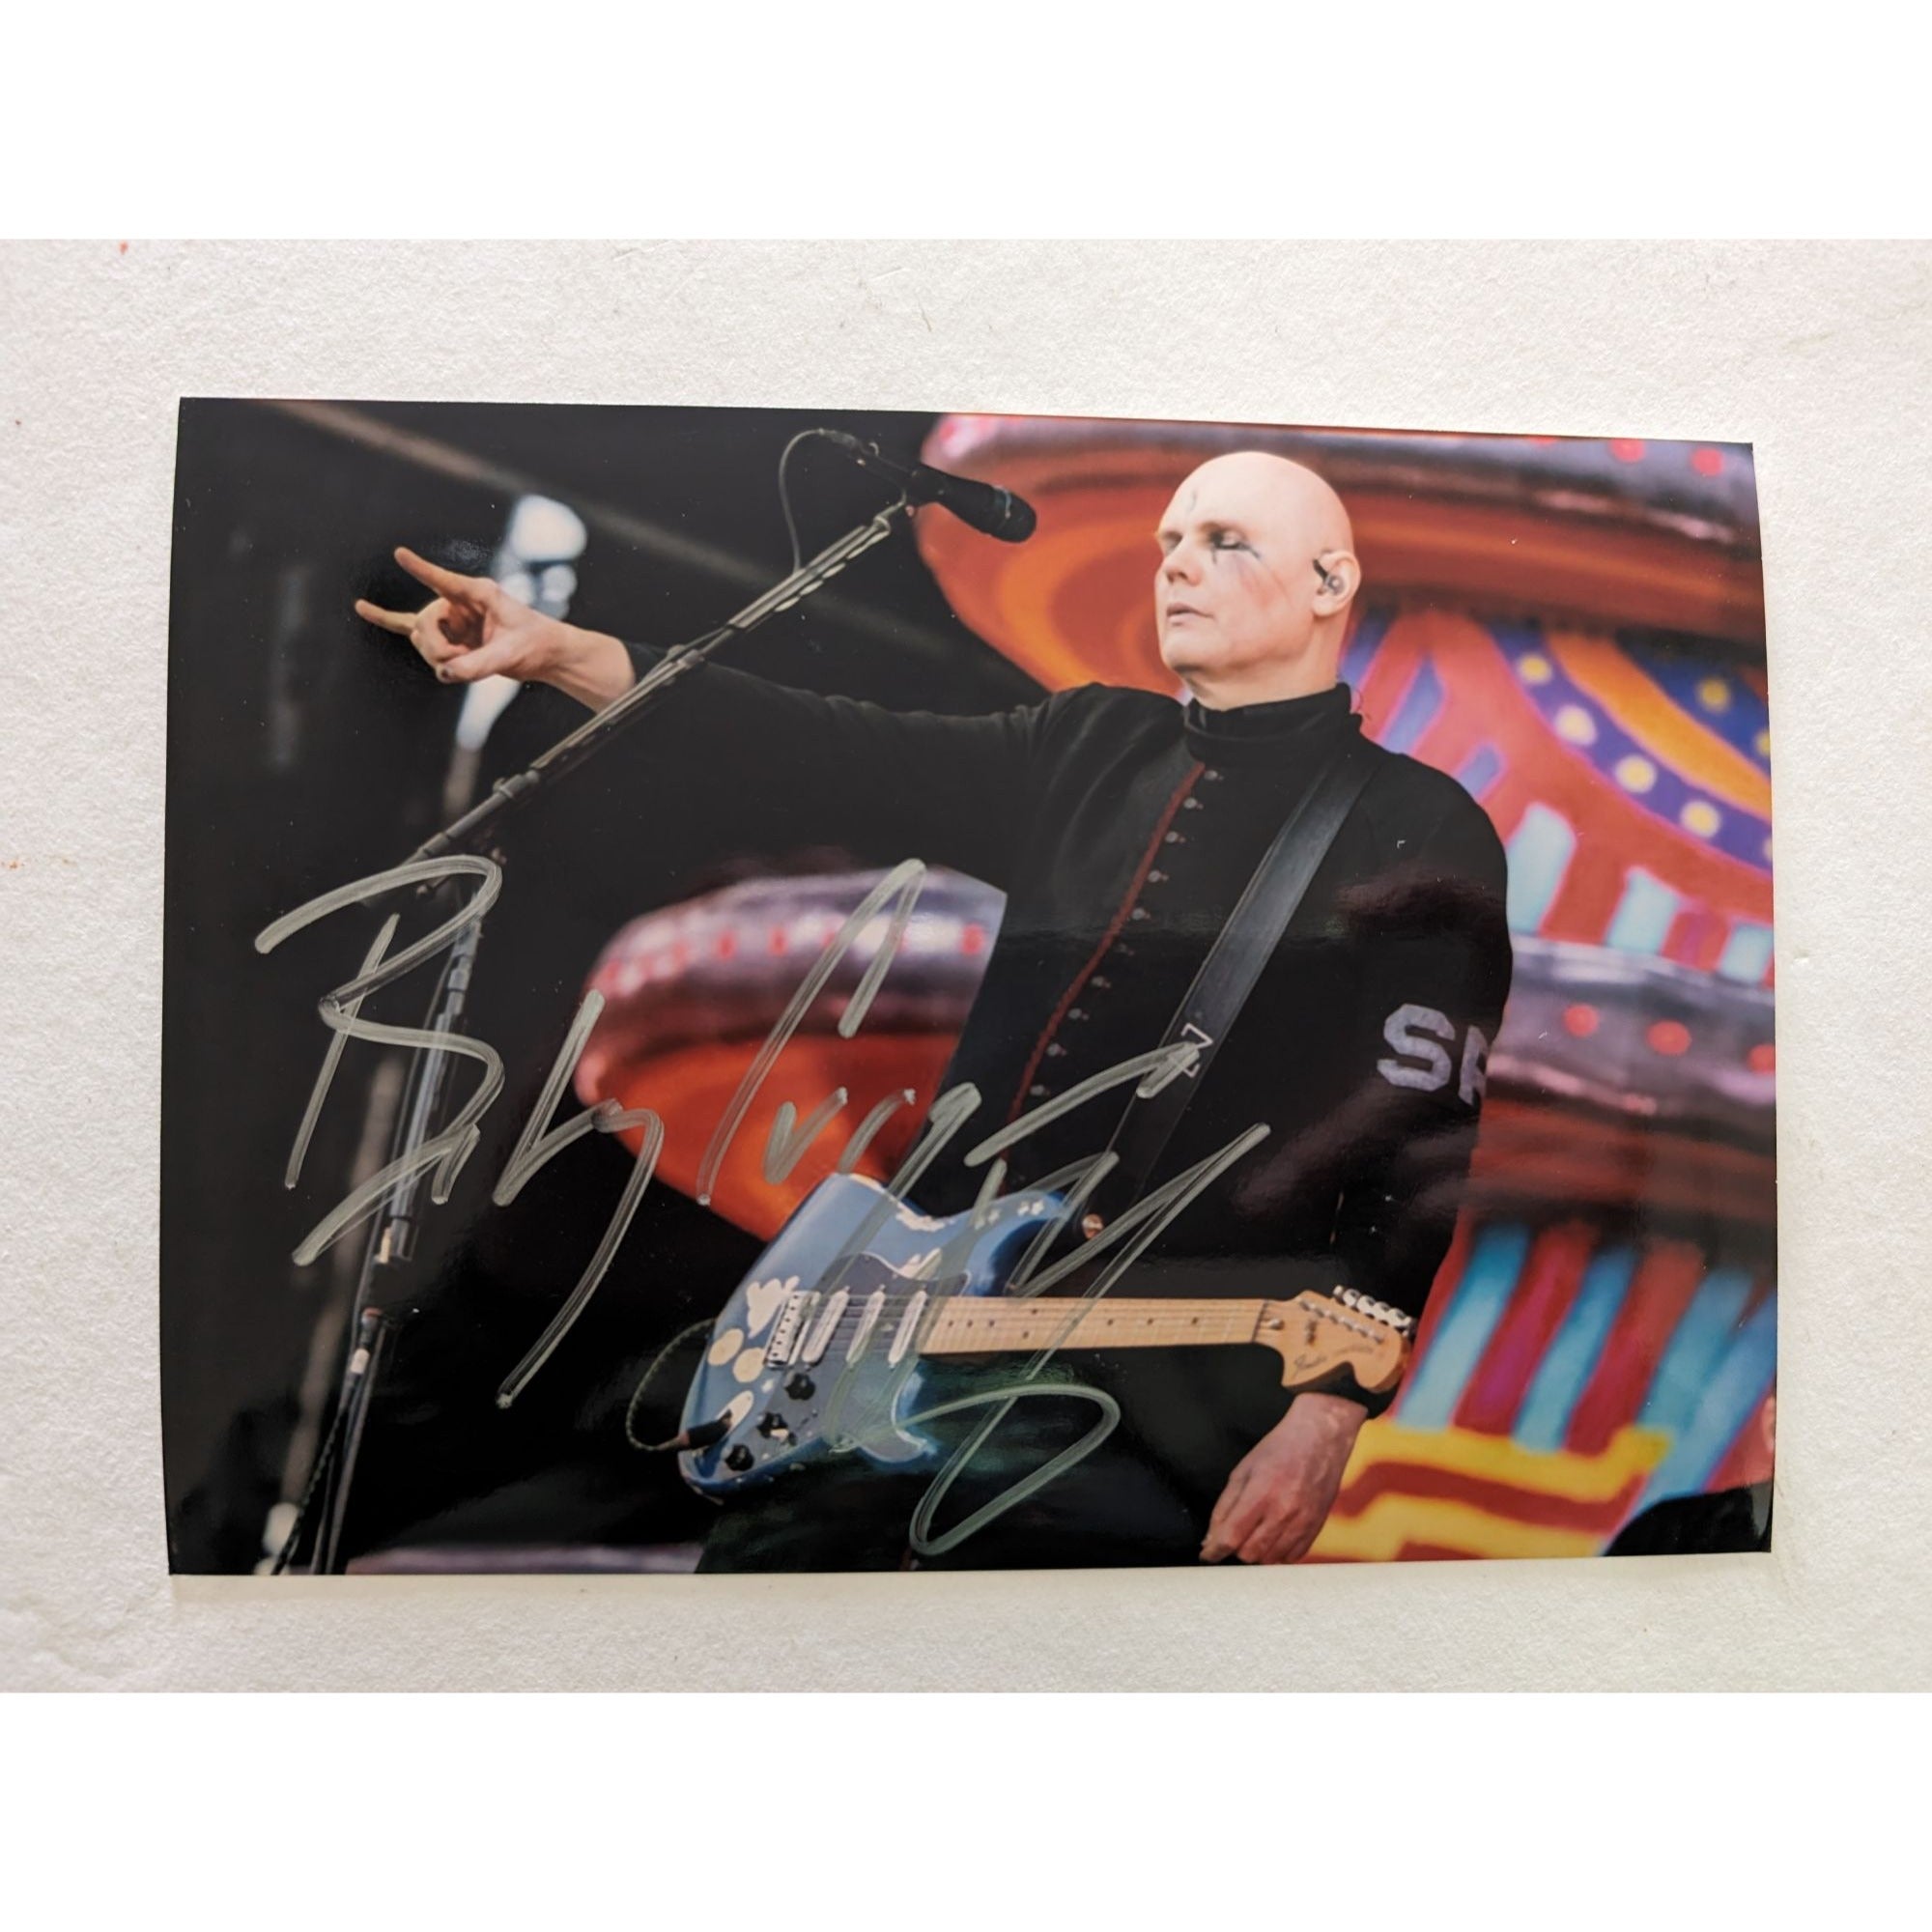 Billy Corgan Smashing Pumpkins 5x7 photo signed with proof